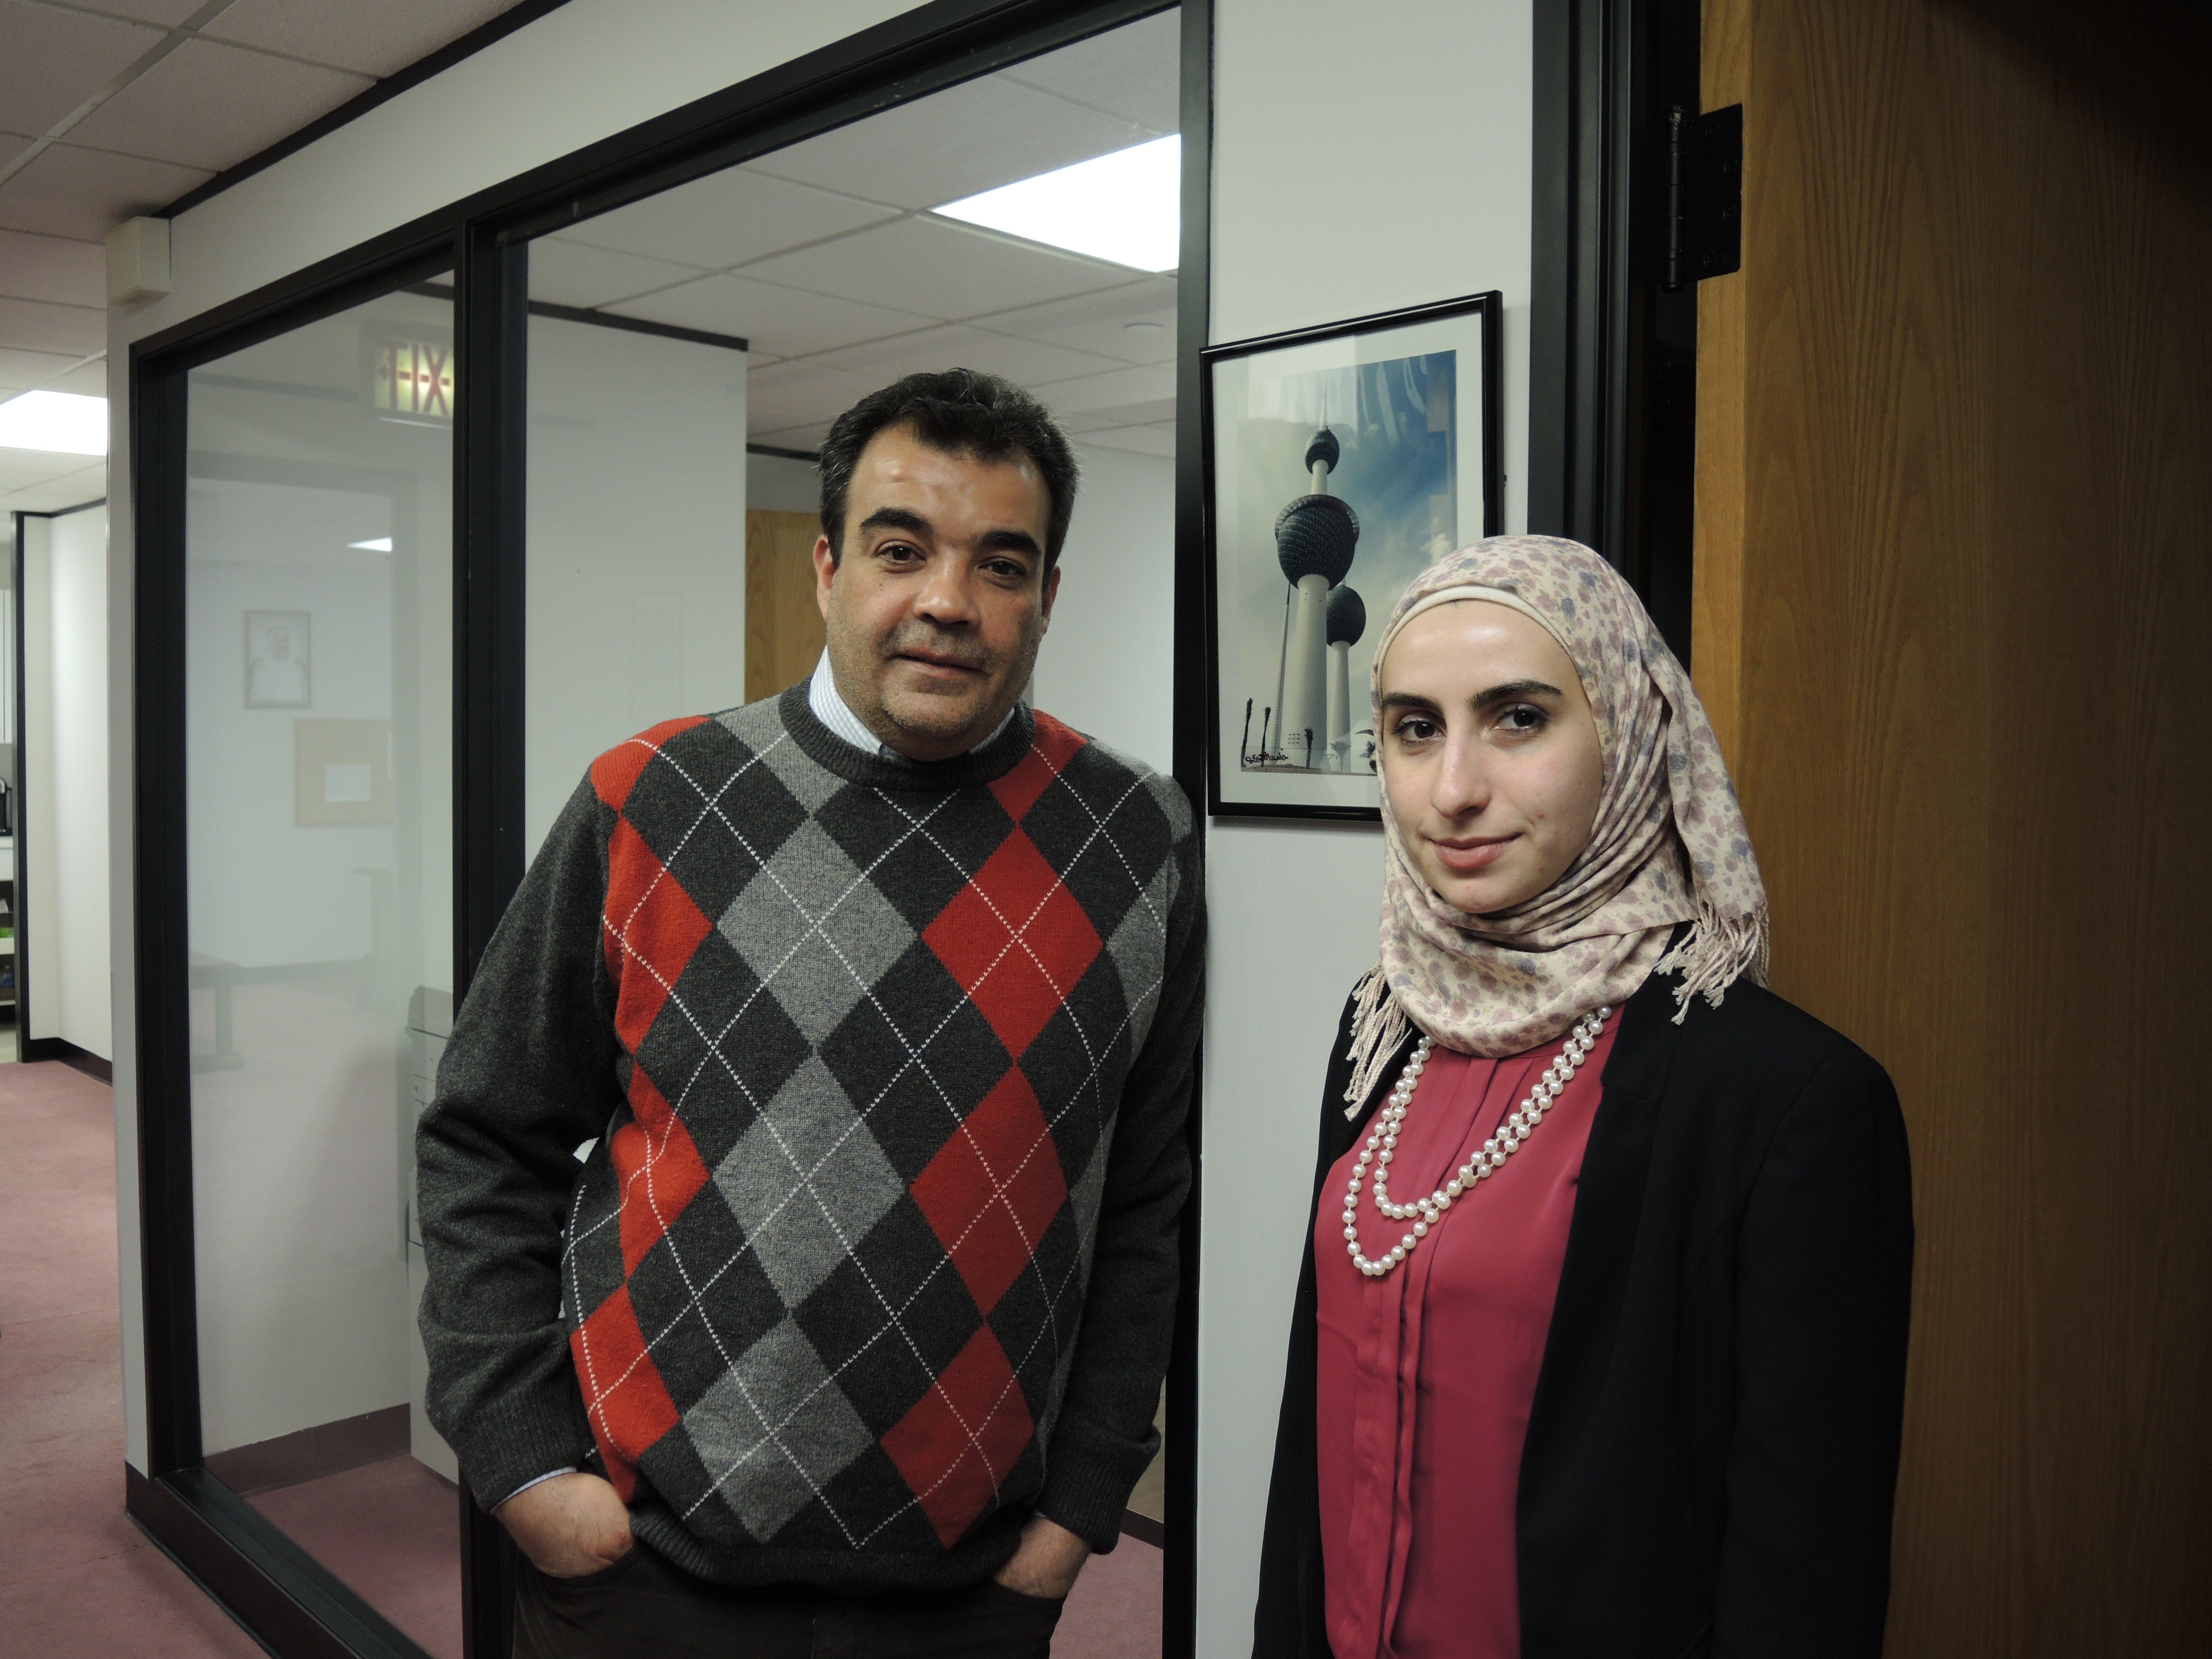 Political advisor of the Syrian-American Council Bassam Barbandi and member of the political authority of the Syrian National Council (SNC) Nora Al-Amir